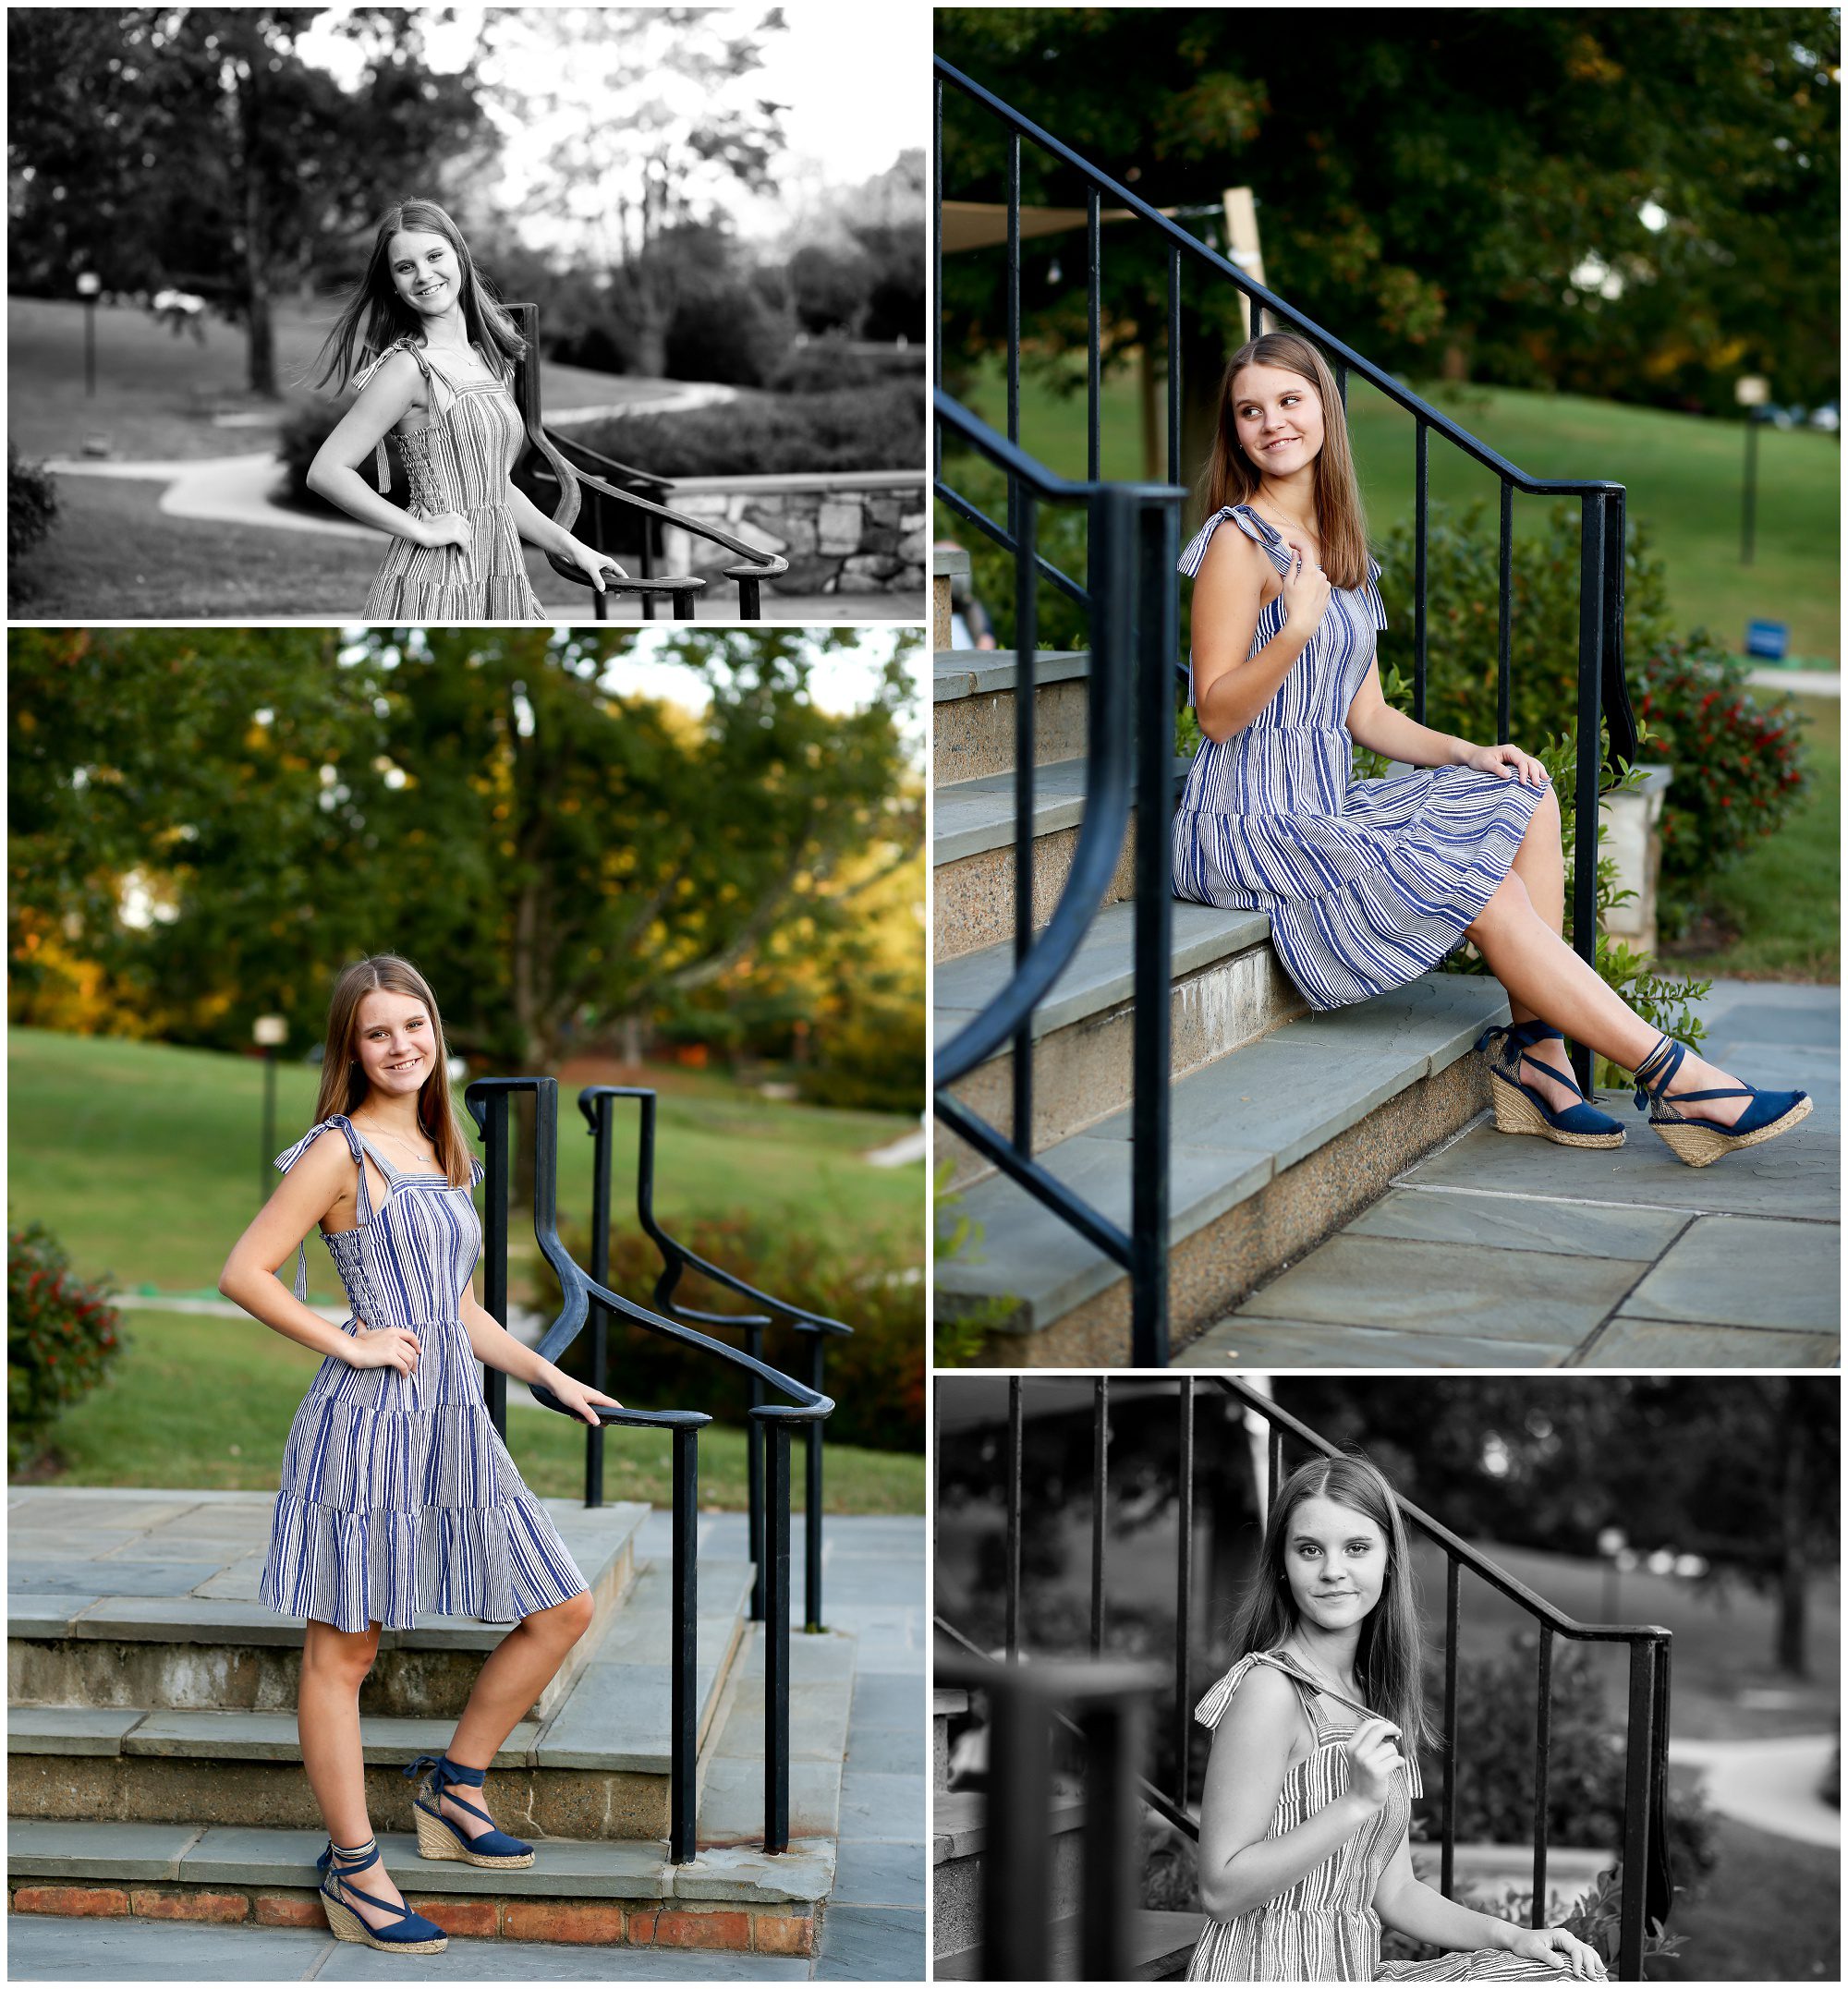 Monticello High School Class of 2023 Senior Portraits in Albemarle County Charlottesville cville virginia photographer pictures photoshoot MHS photography 